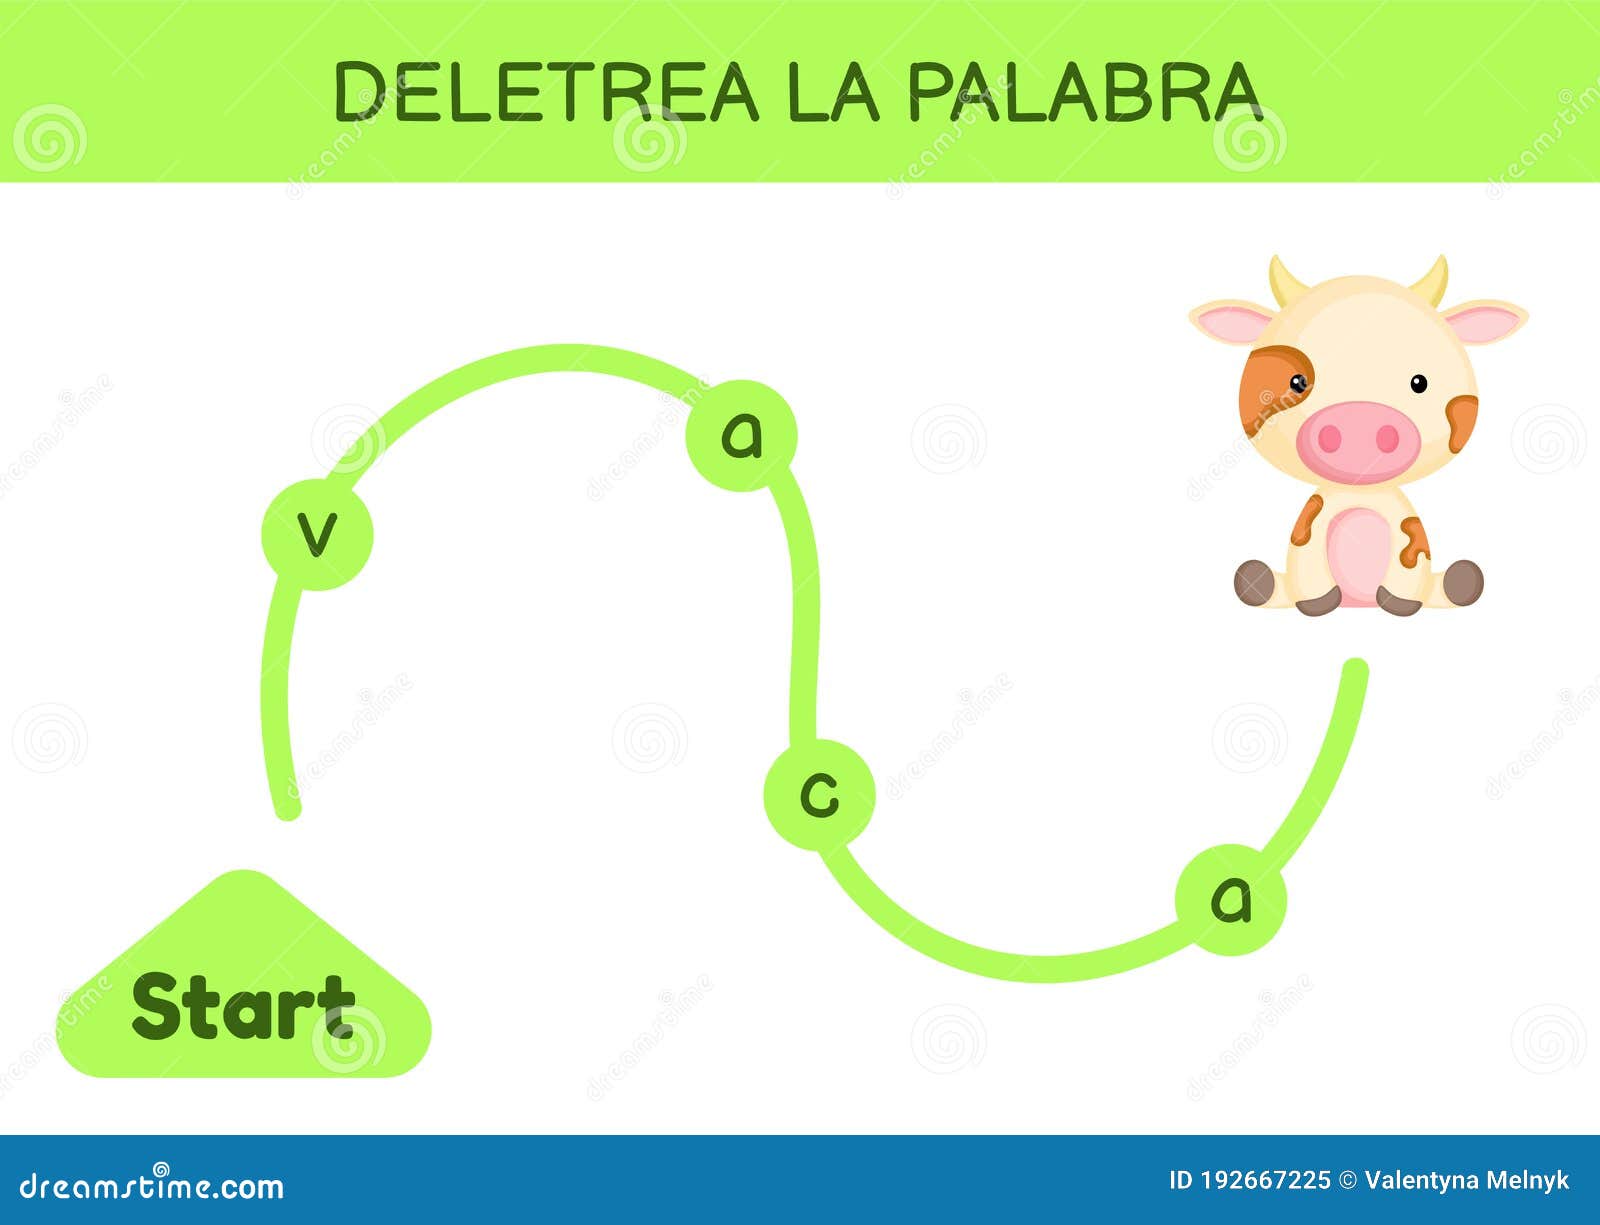 deletrea la palabra - spell the word. maze for kids. spelling word game template. learn to read word cow. activity page for study